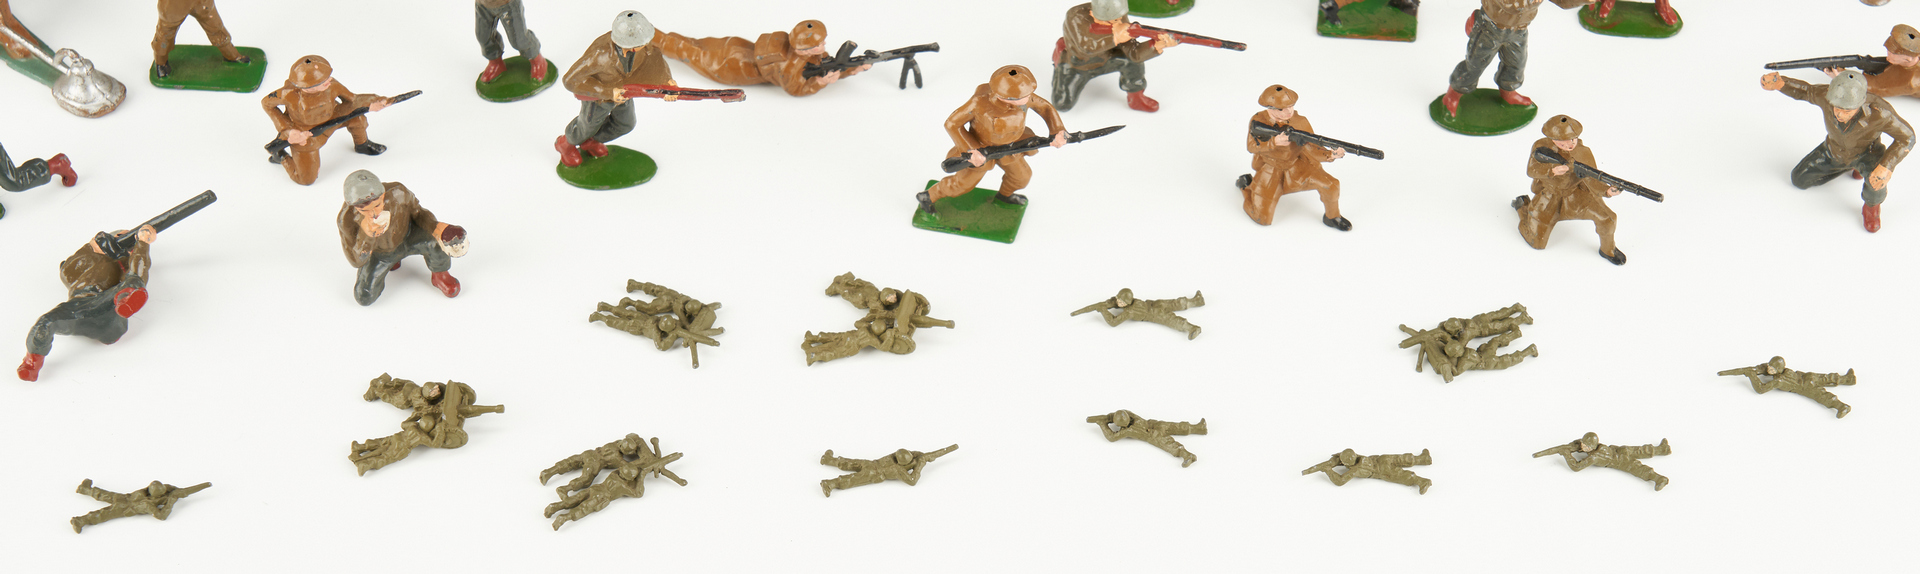 Lot 797: 207 Cast Metal WWI & II Toy Soldiers, incl. Manoil